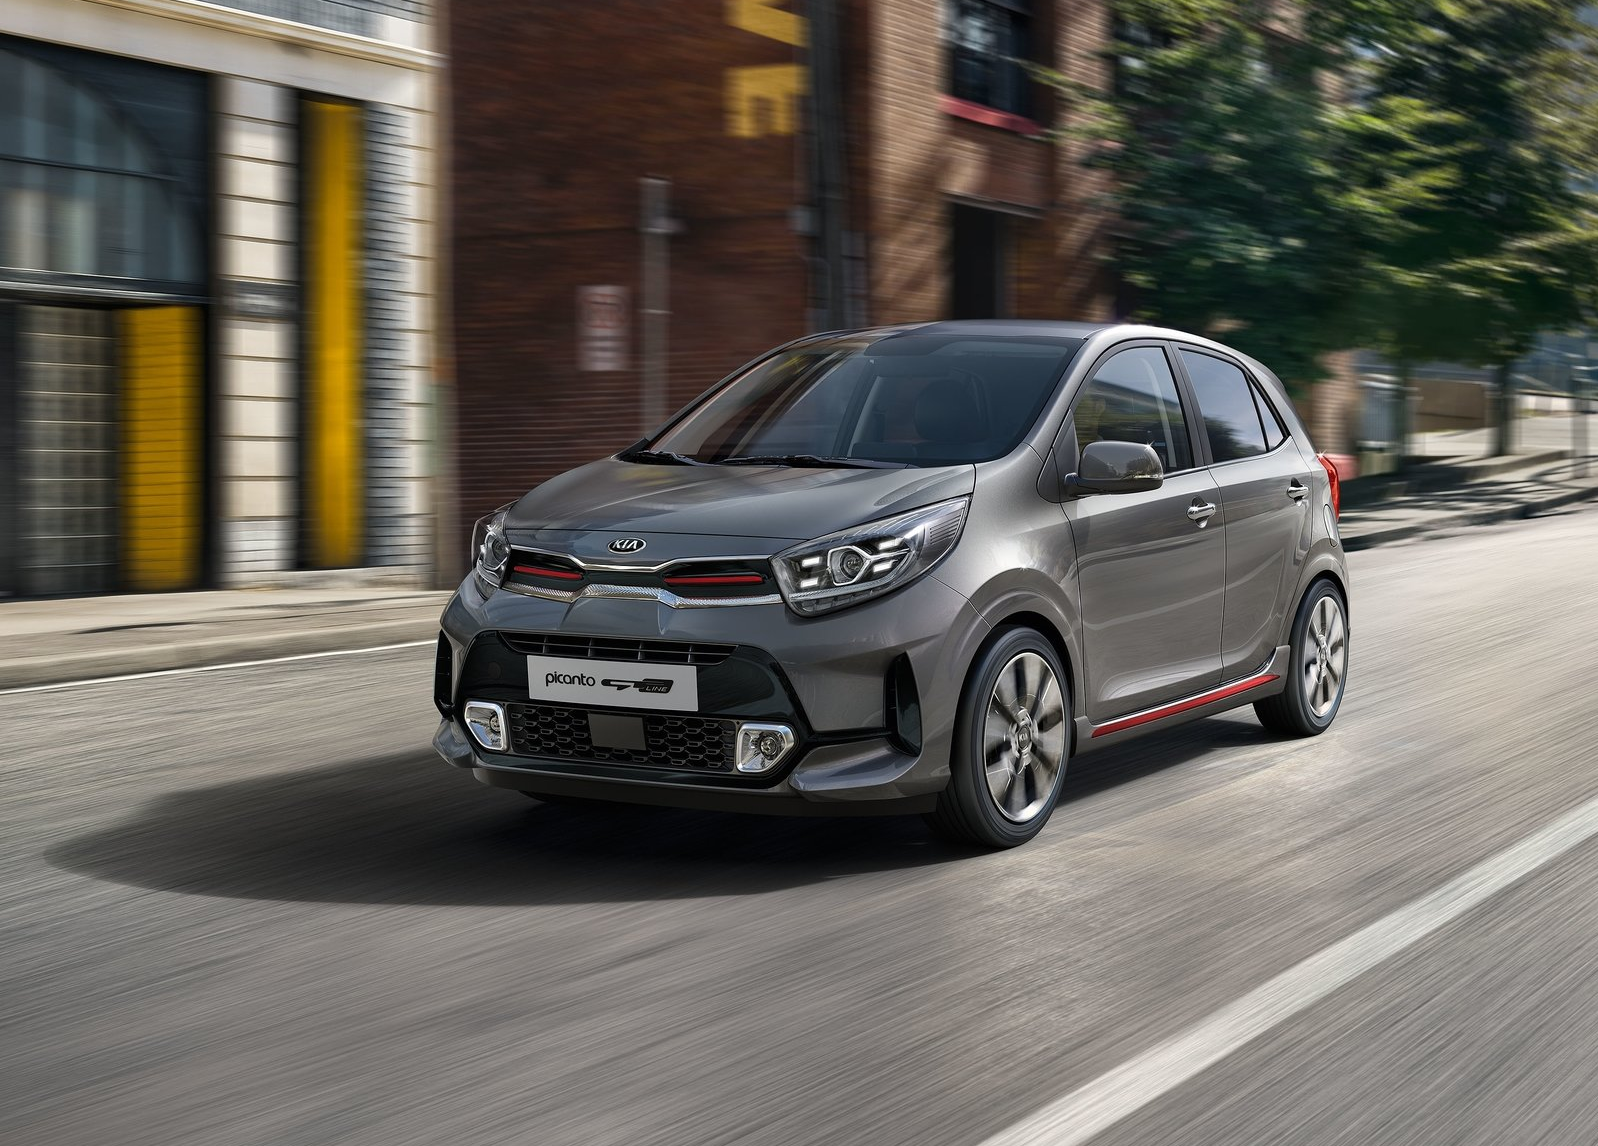 2021 Kia Picanto: Expectations and what we know so far